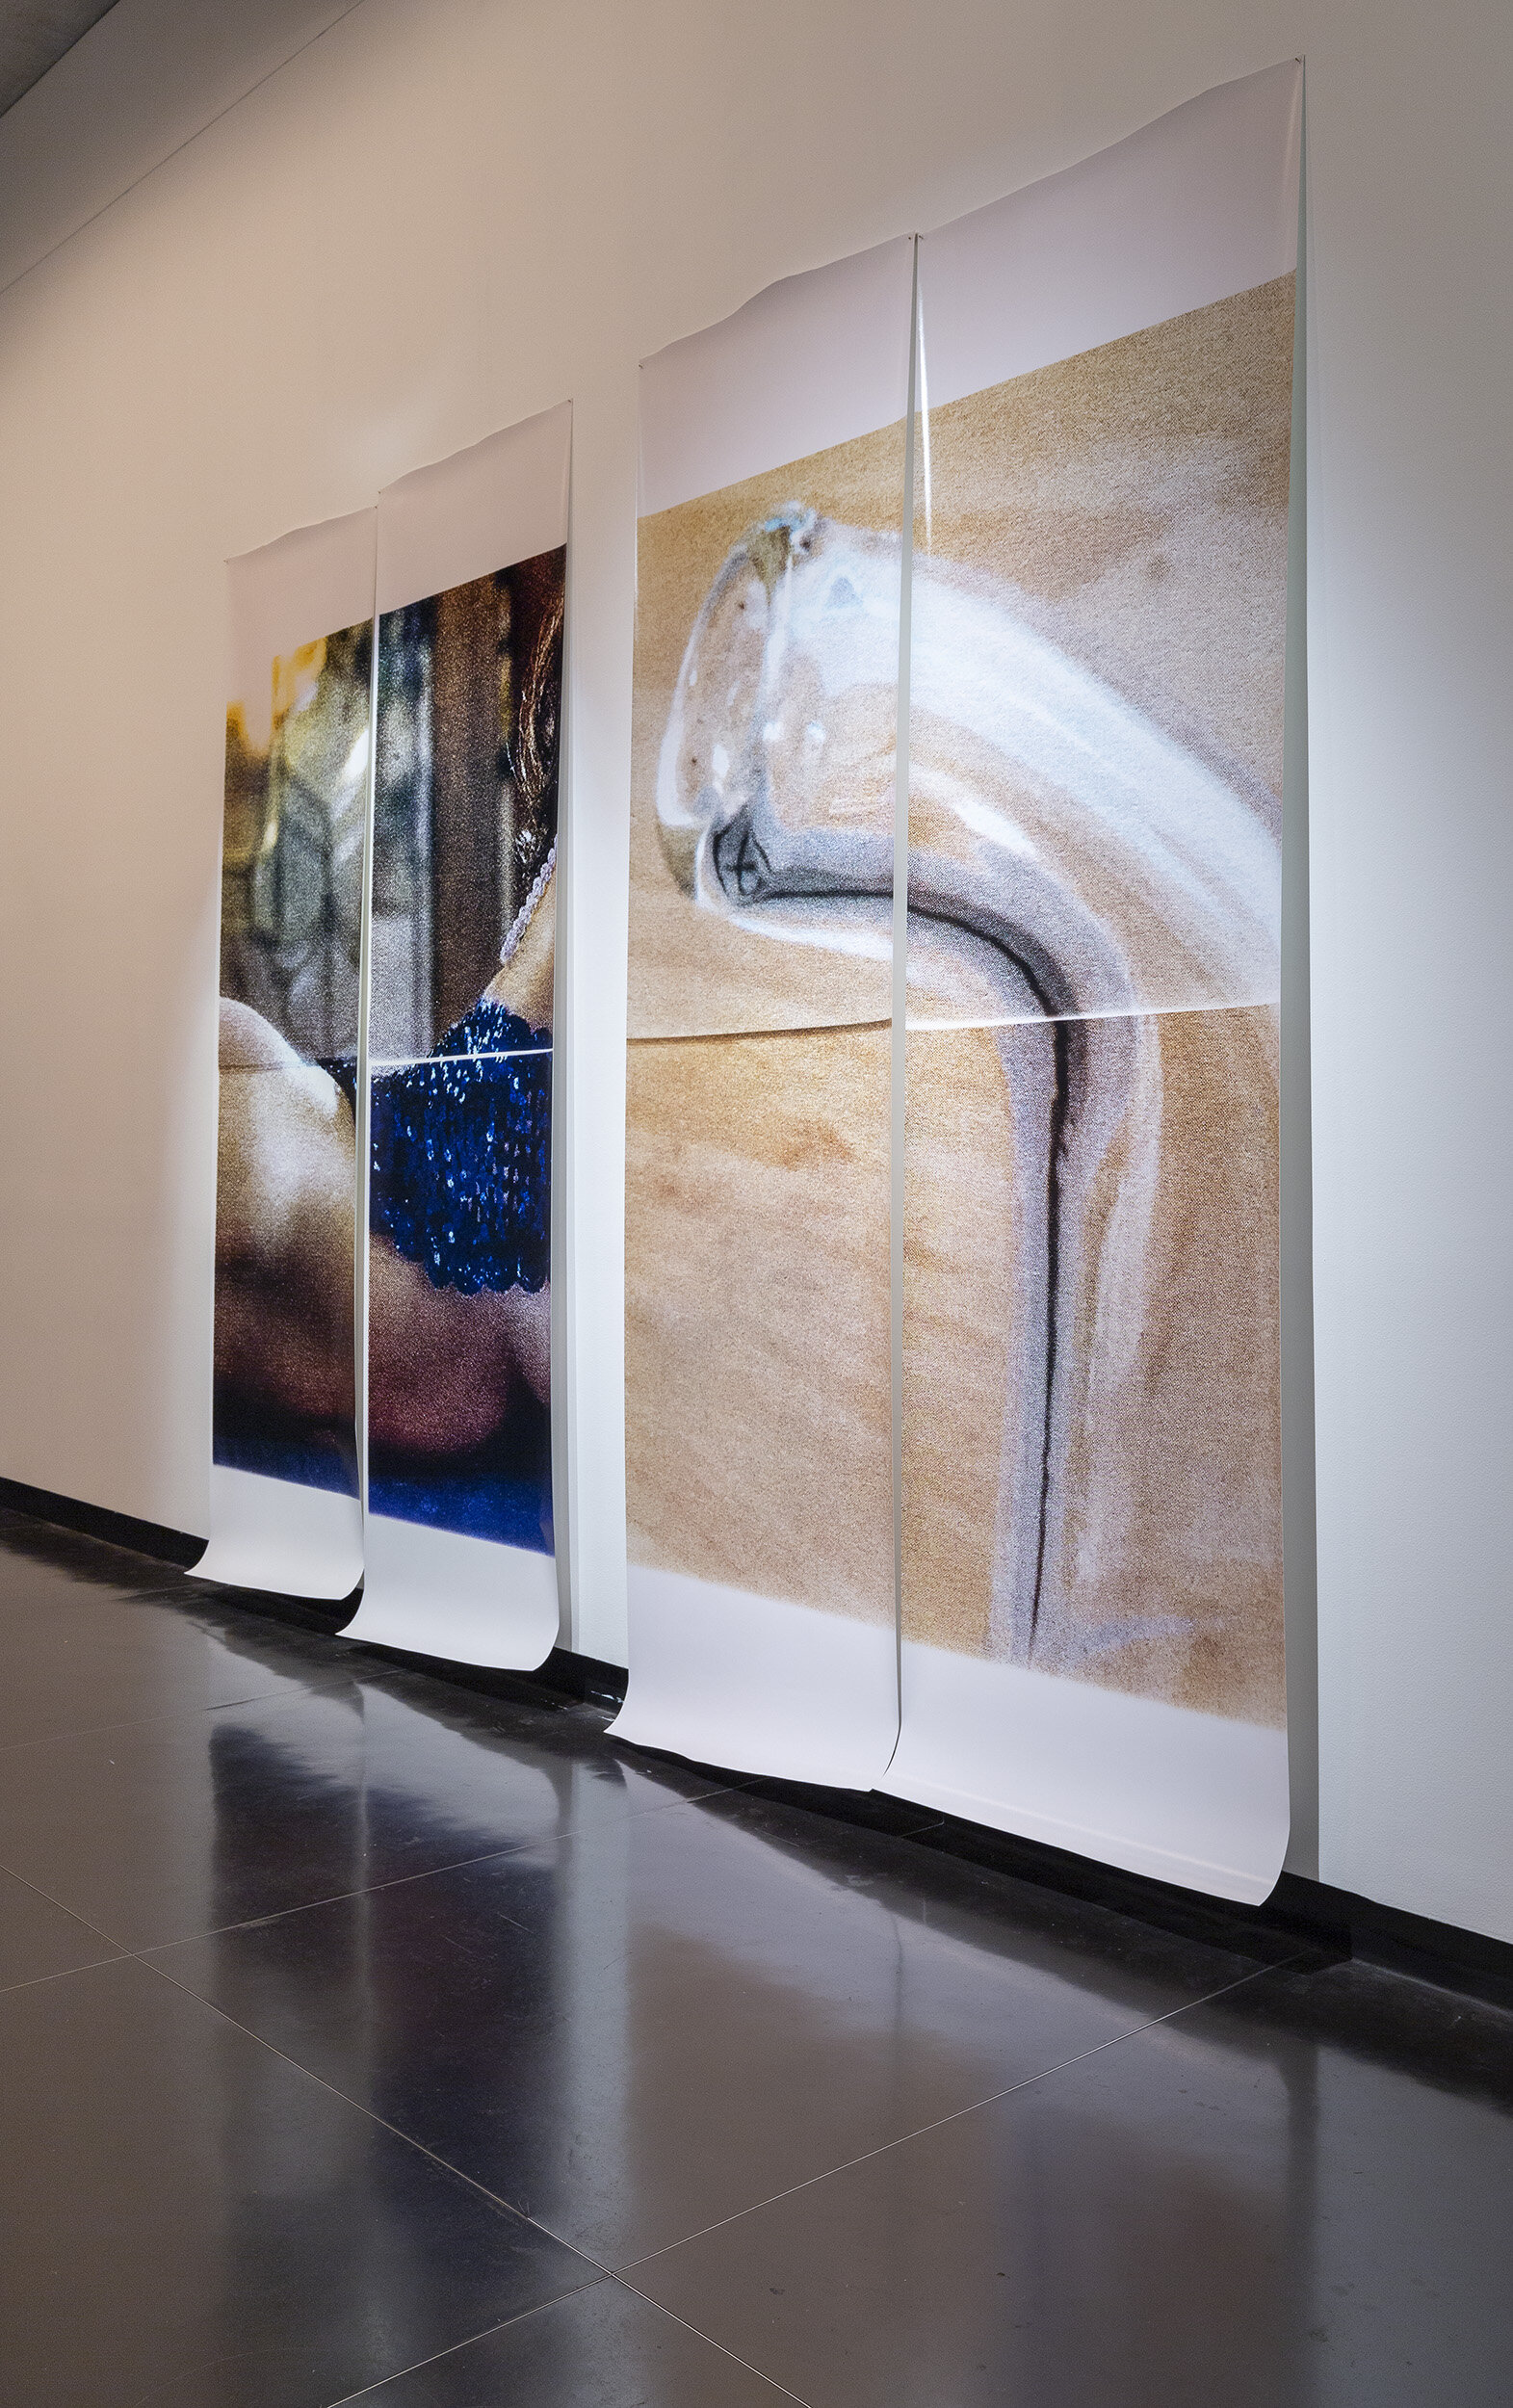 Photograph by Christian Capurro. Installation view, Performing textiles, Ian Potter Museum of Art, University of Melbourne.